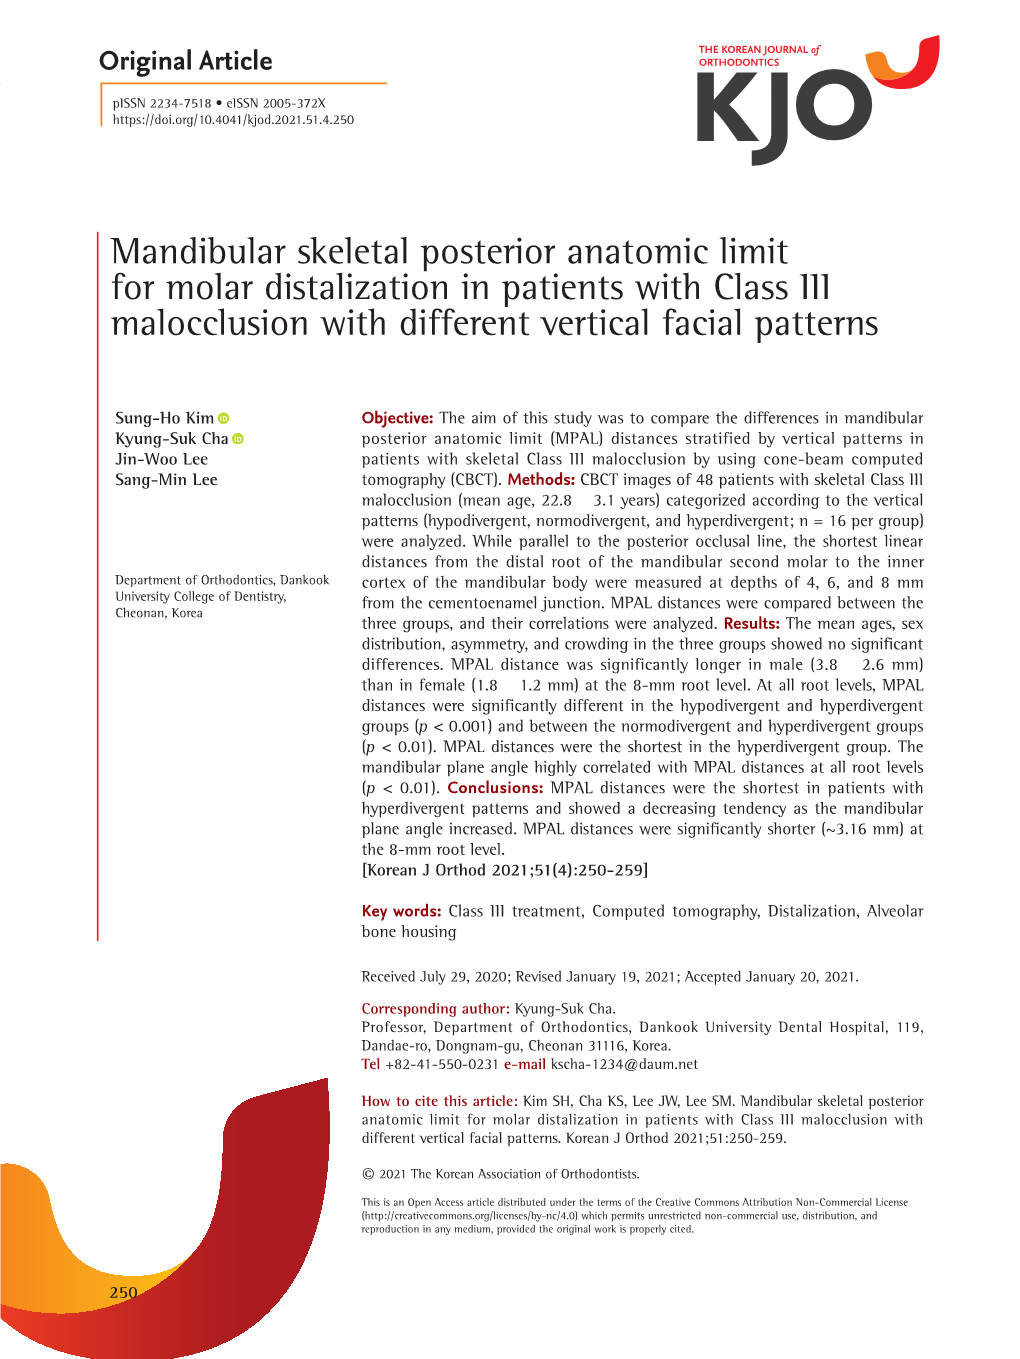 Mandibular Skeletal Posterior Anatomic Limit for Molar Distalization in Patients with Class III Malocclusion with Different Vertical Facial Patterns